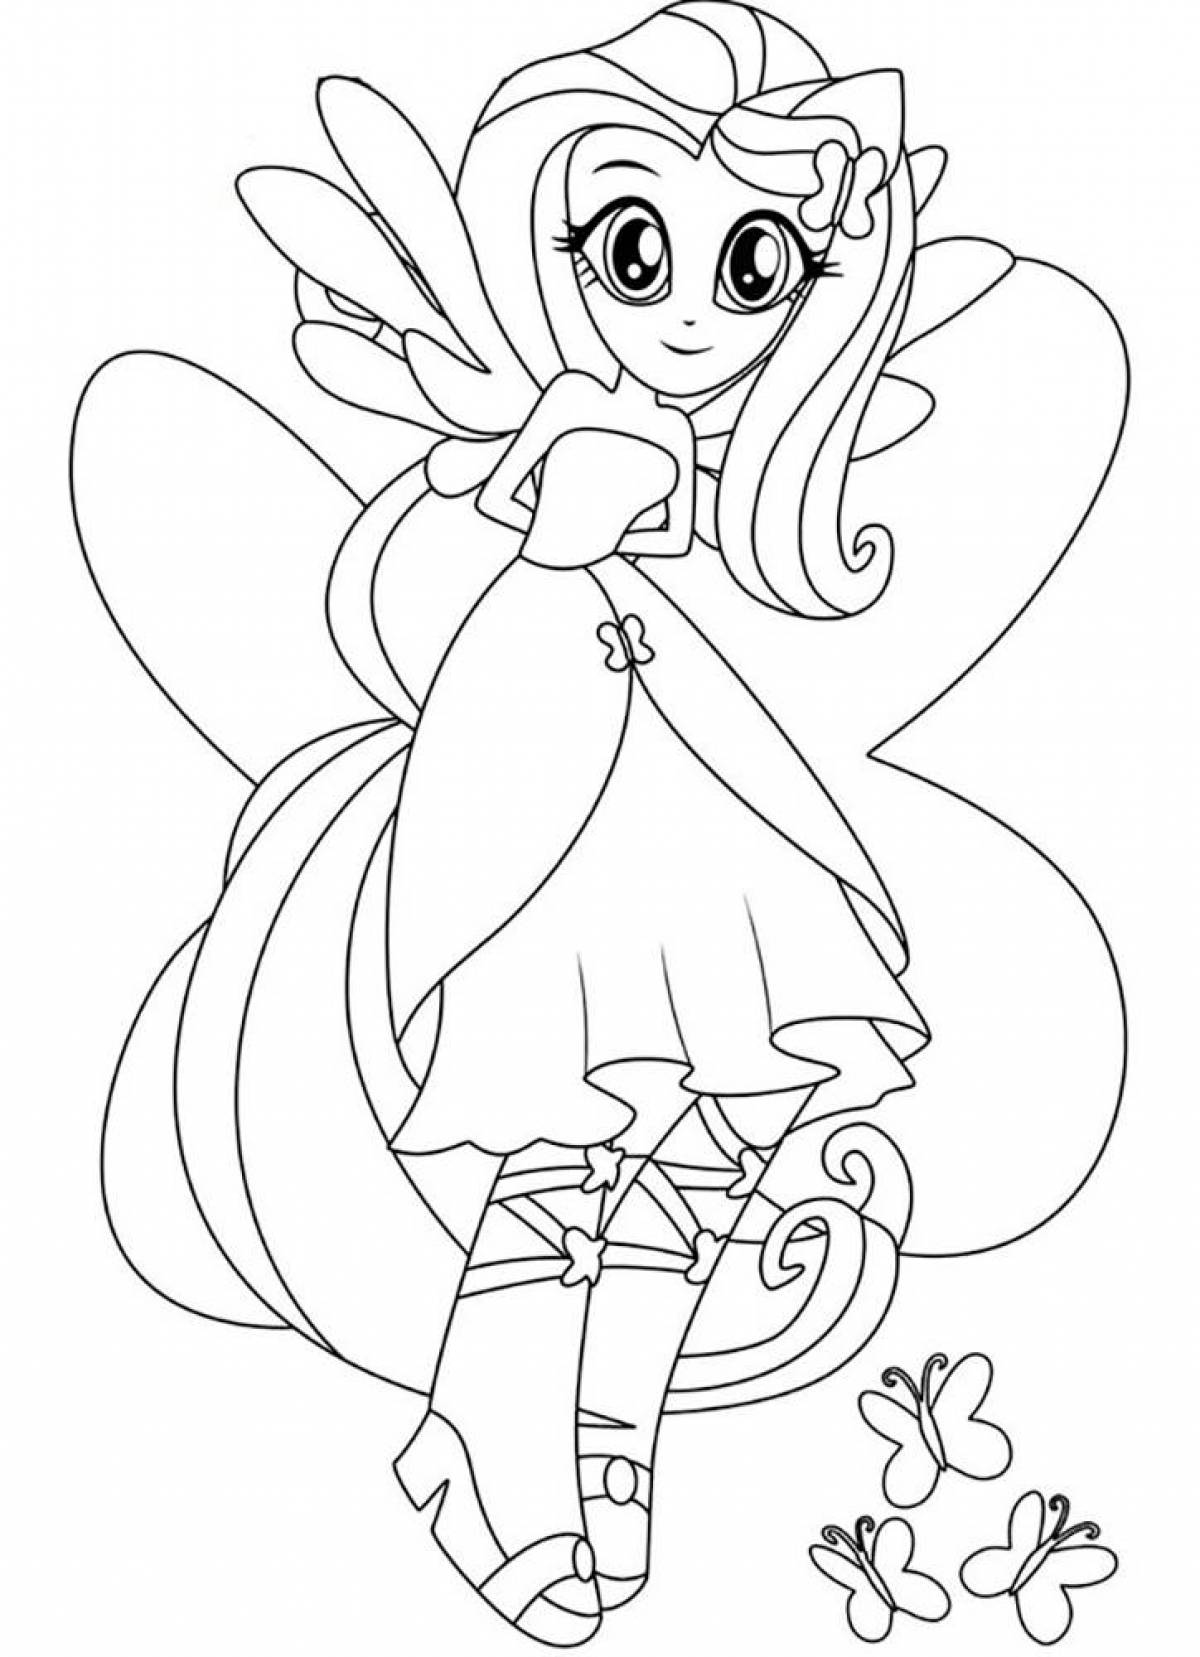 Jovial equestria girls coloring page